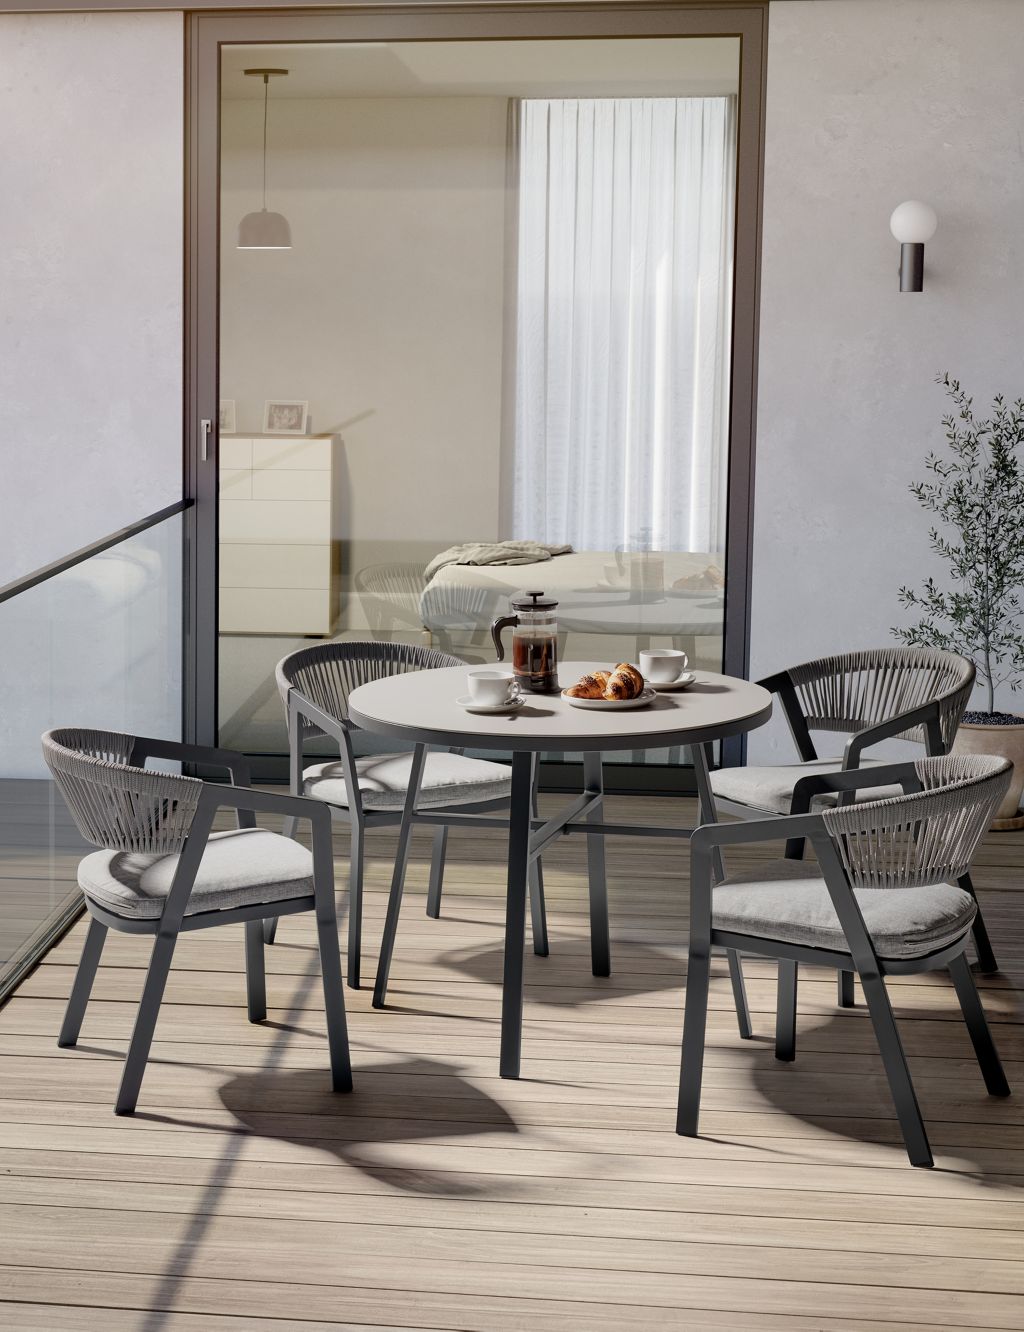 Cassis Garden Dining Table & Chairs